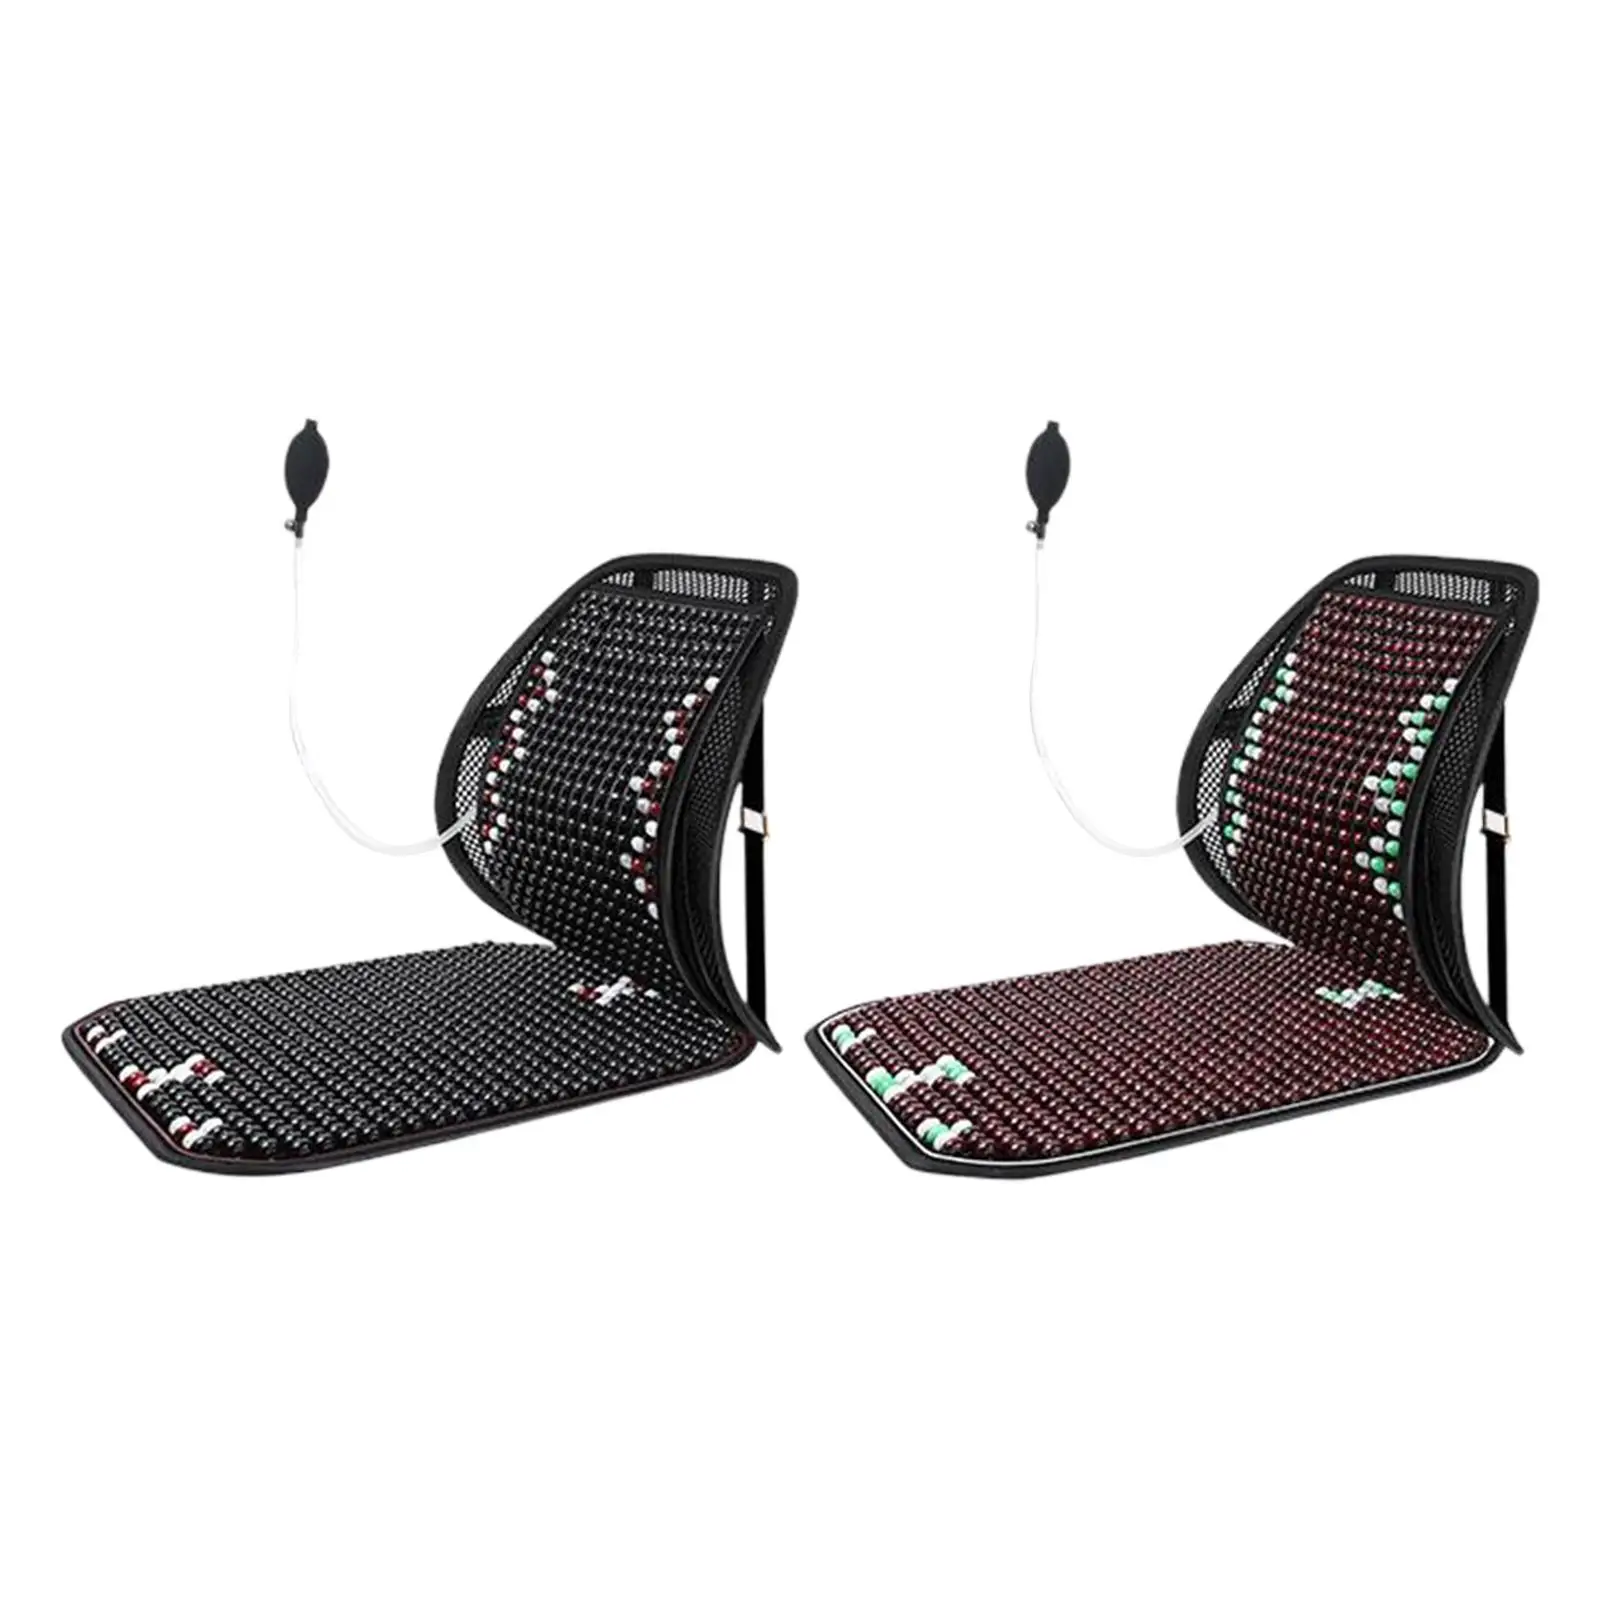 Wood Bead Automotive Seat Covers Massage Cushion Air Inflation Design Exquisite Workmanship Sturdy Breathable Mesh Anti Slip